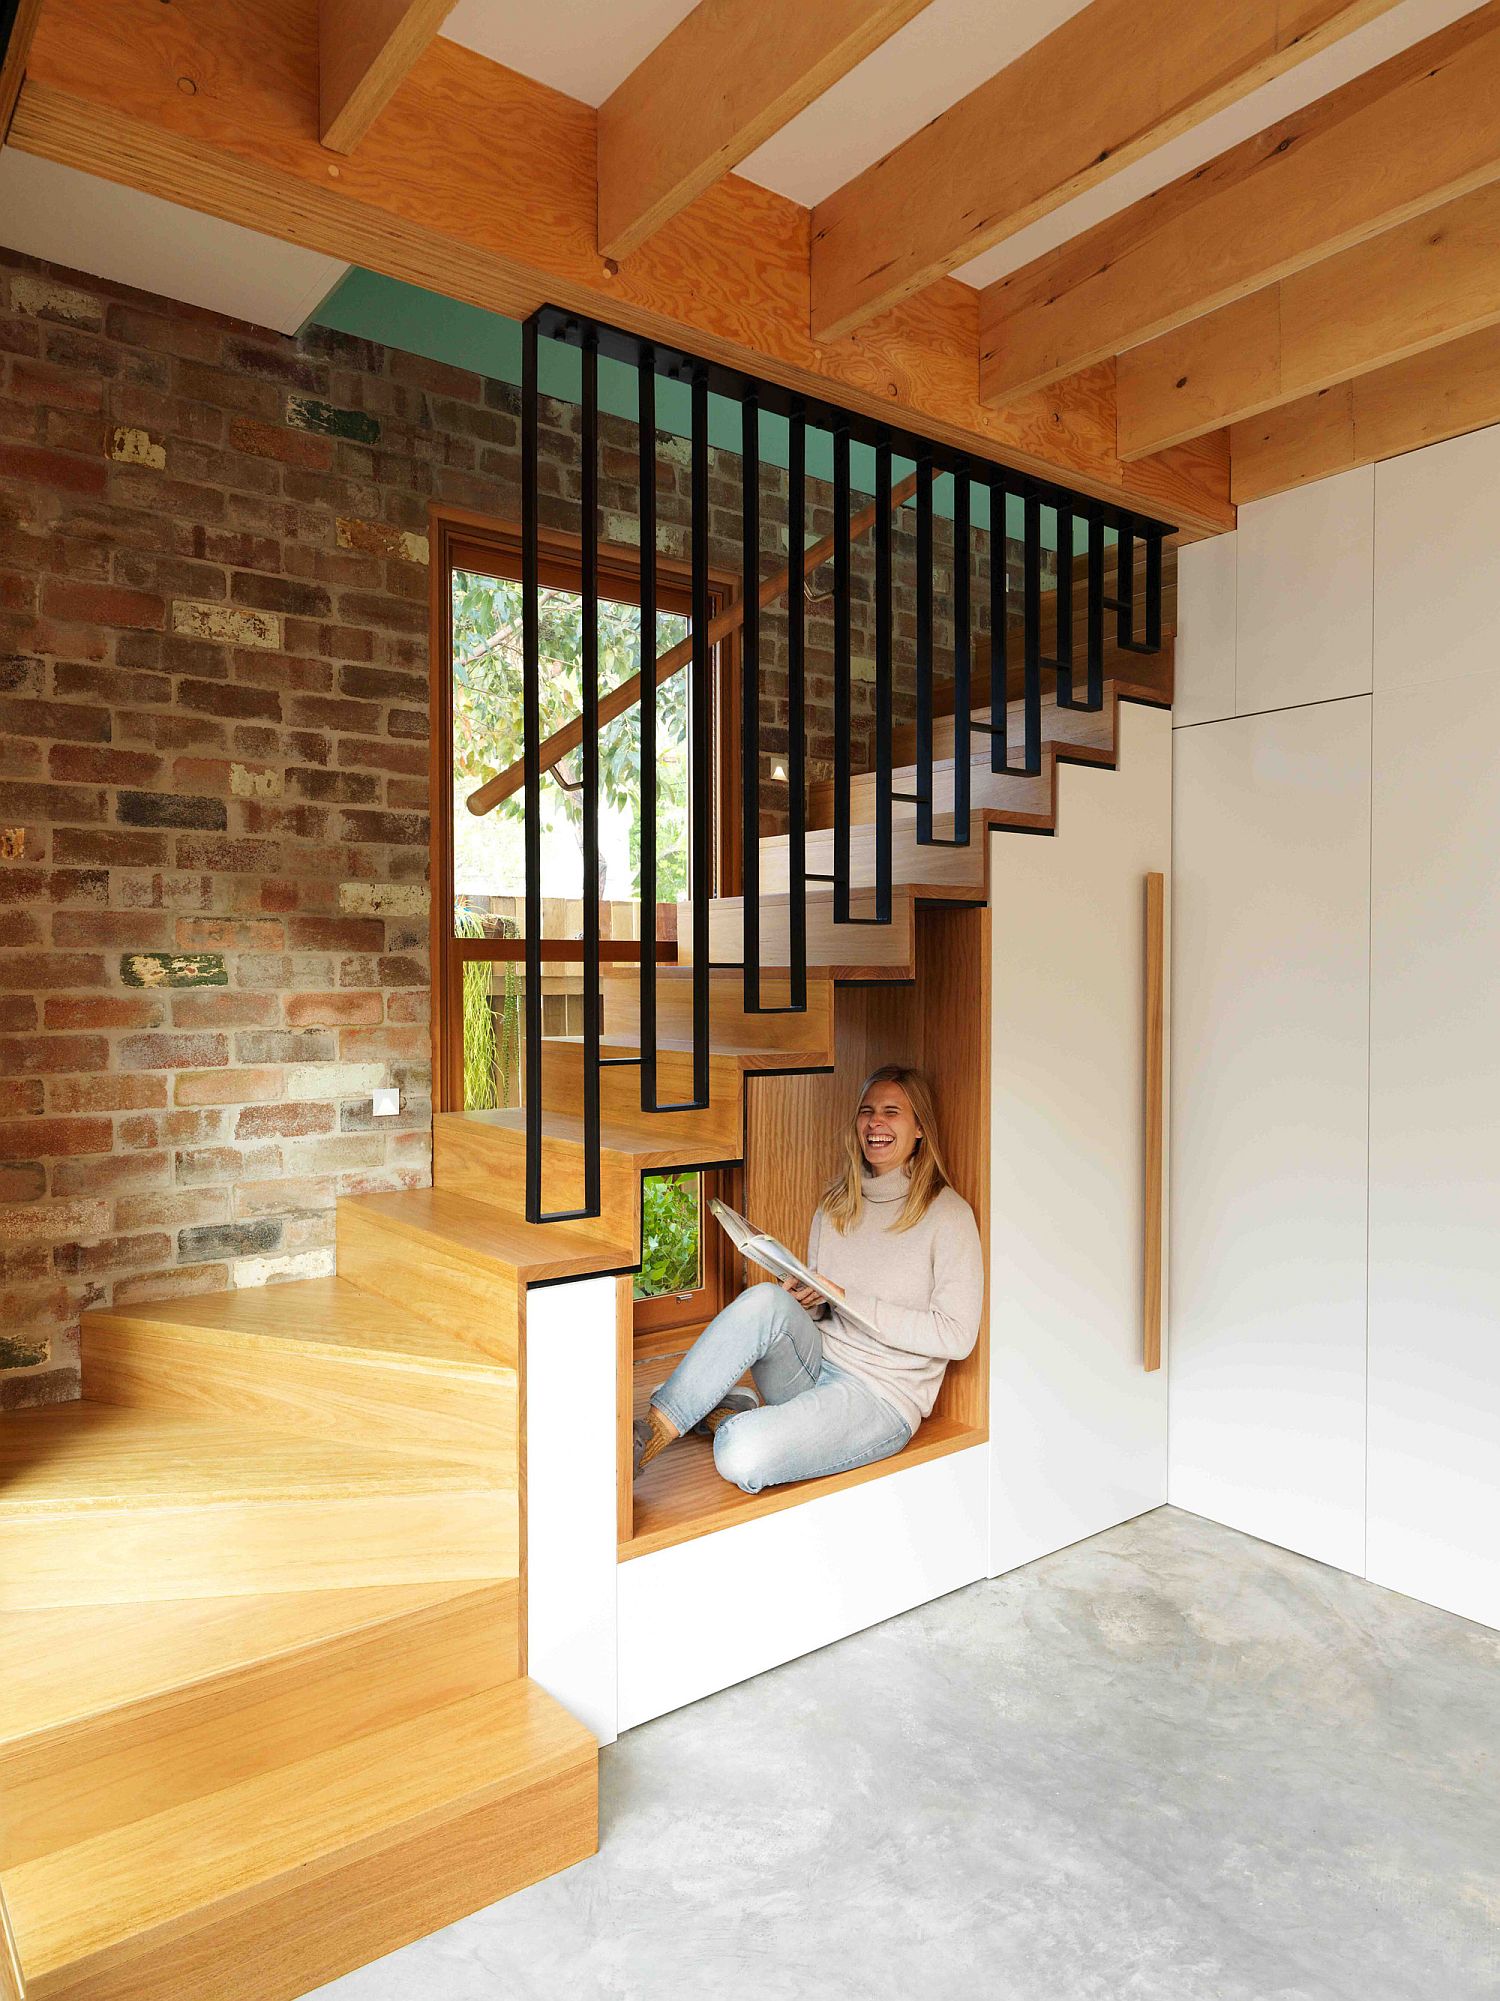 Tiny reading and sitting nook under the stairway